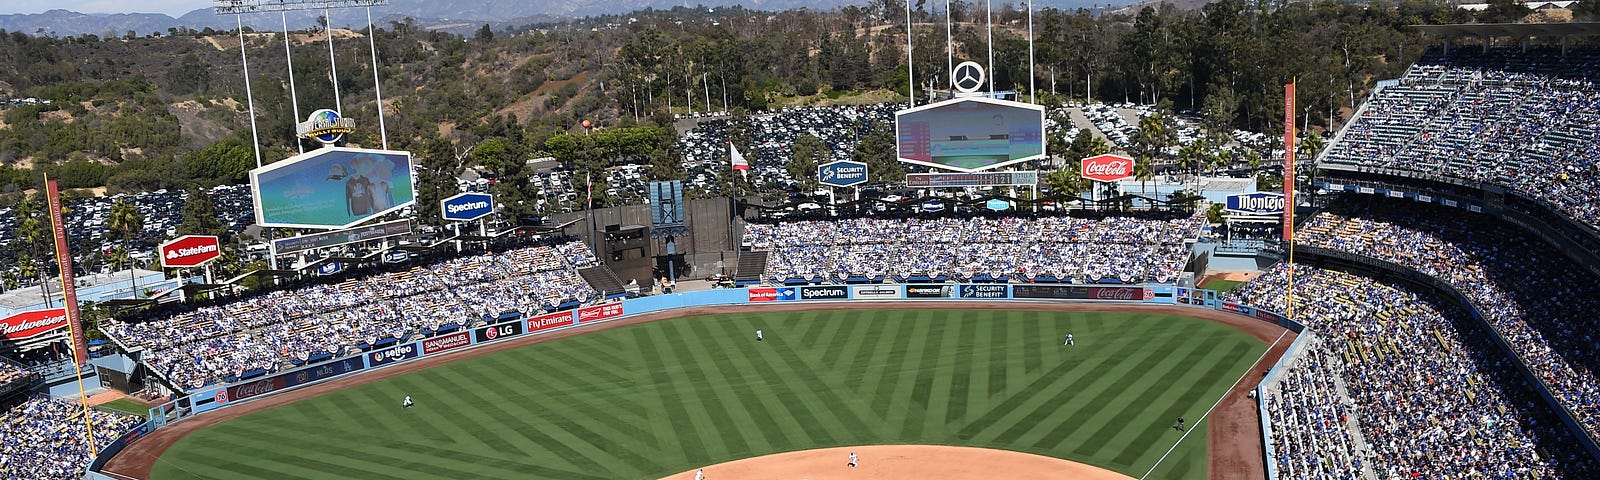 Dodgers announce 2019 promo schedule, by Rowan Kavner